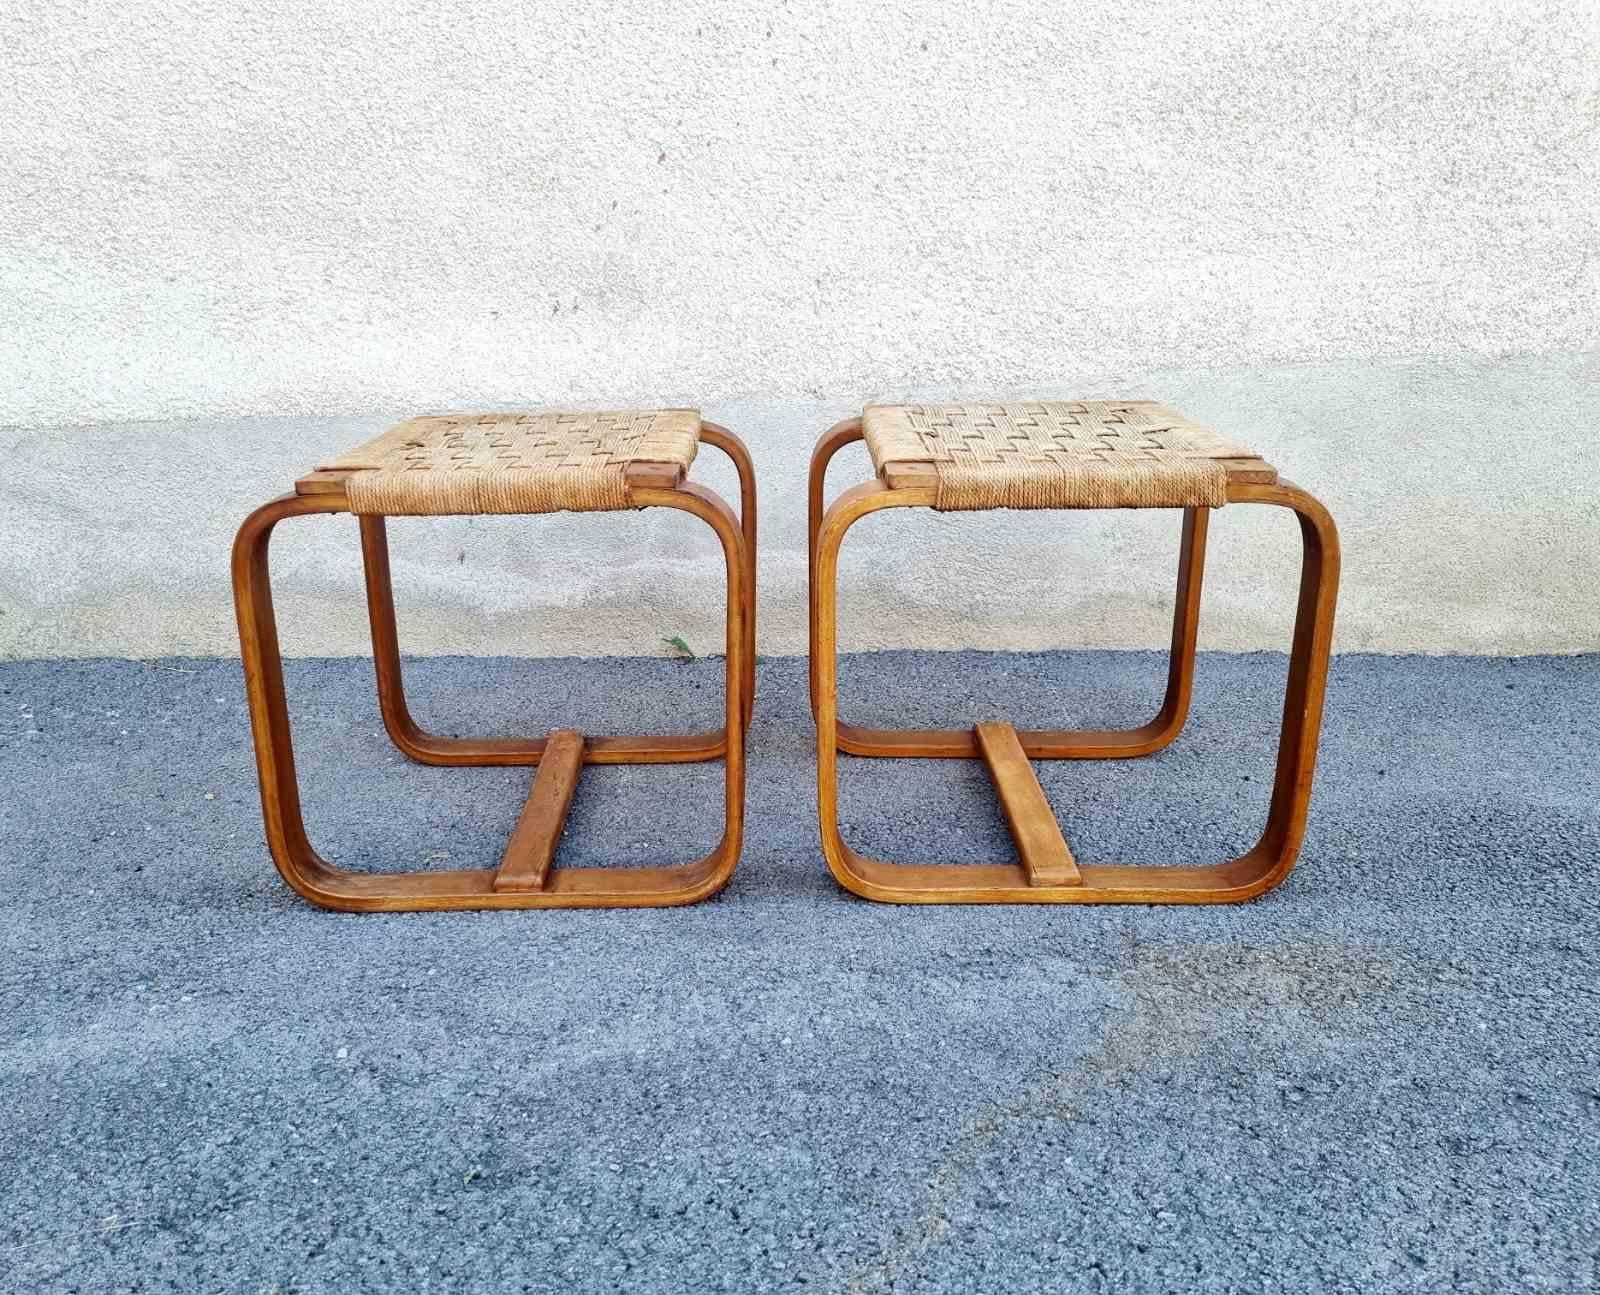 Rare Pair of Stools by Giuseppe Pagano Pogatschnig for Gino Maggioni, Italy 40s For Sale 1